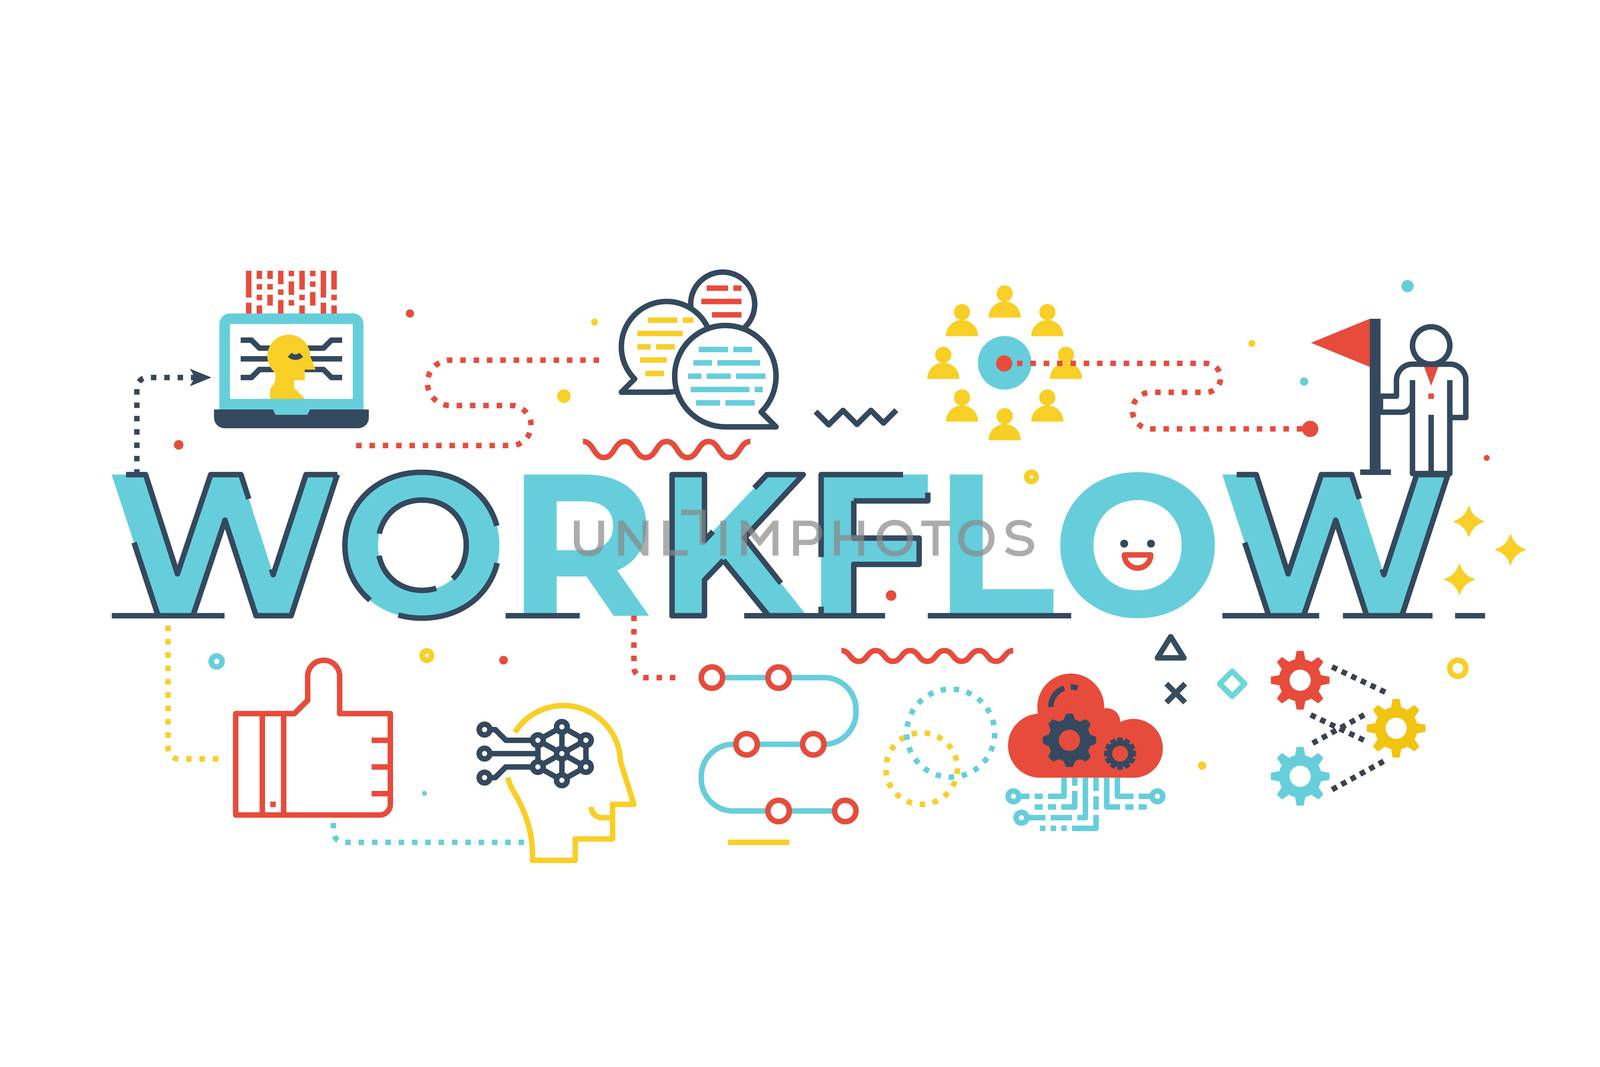 Workflow word illustration by nongpimmy